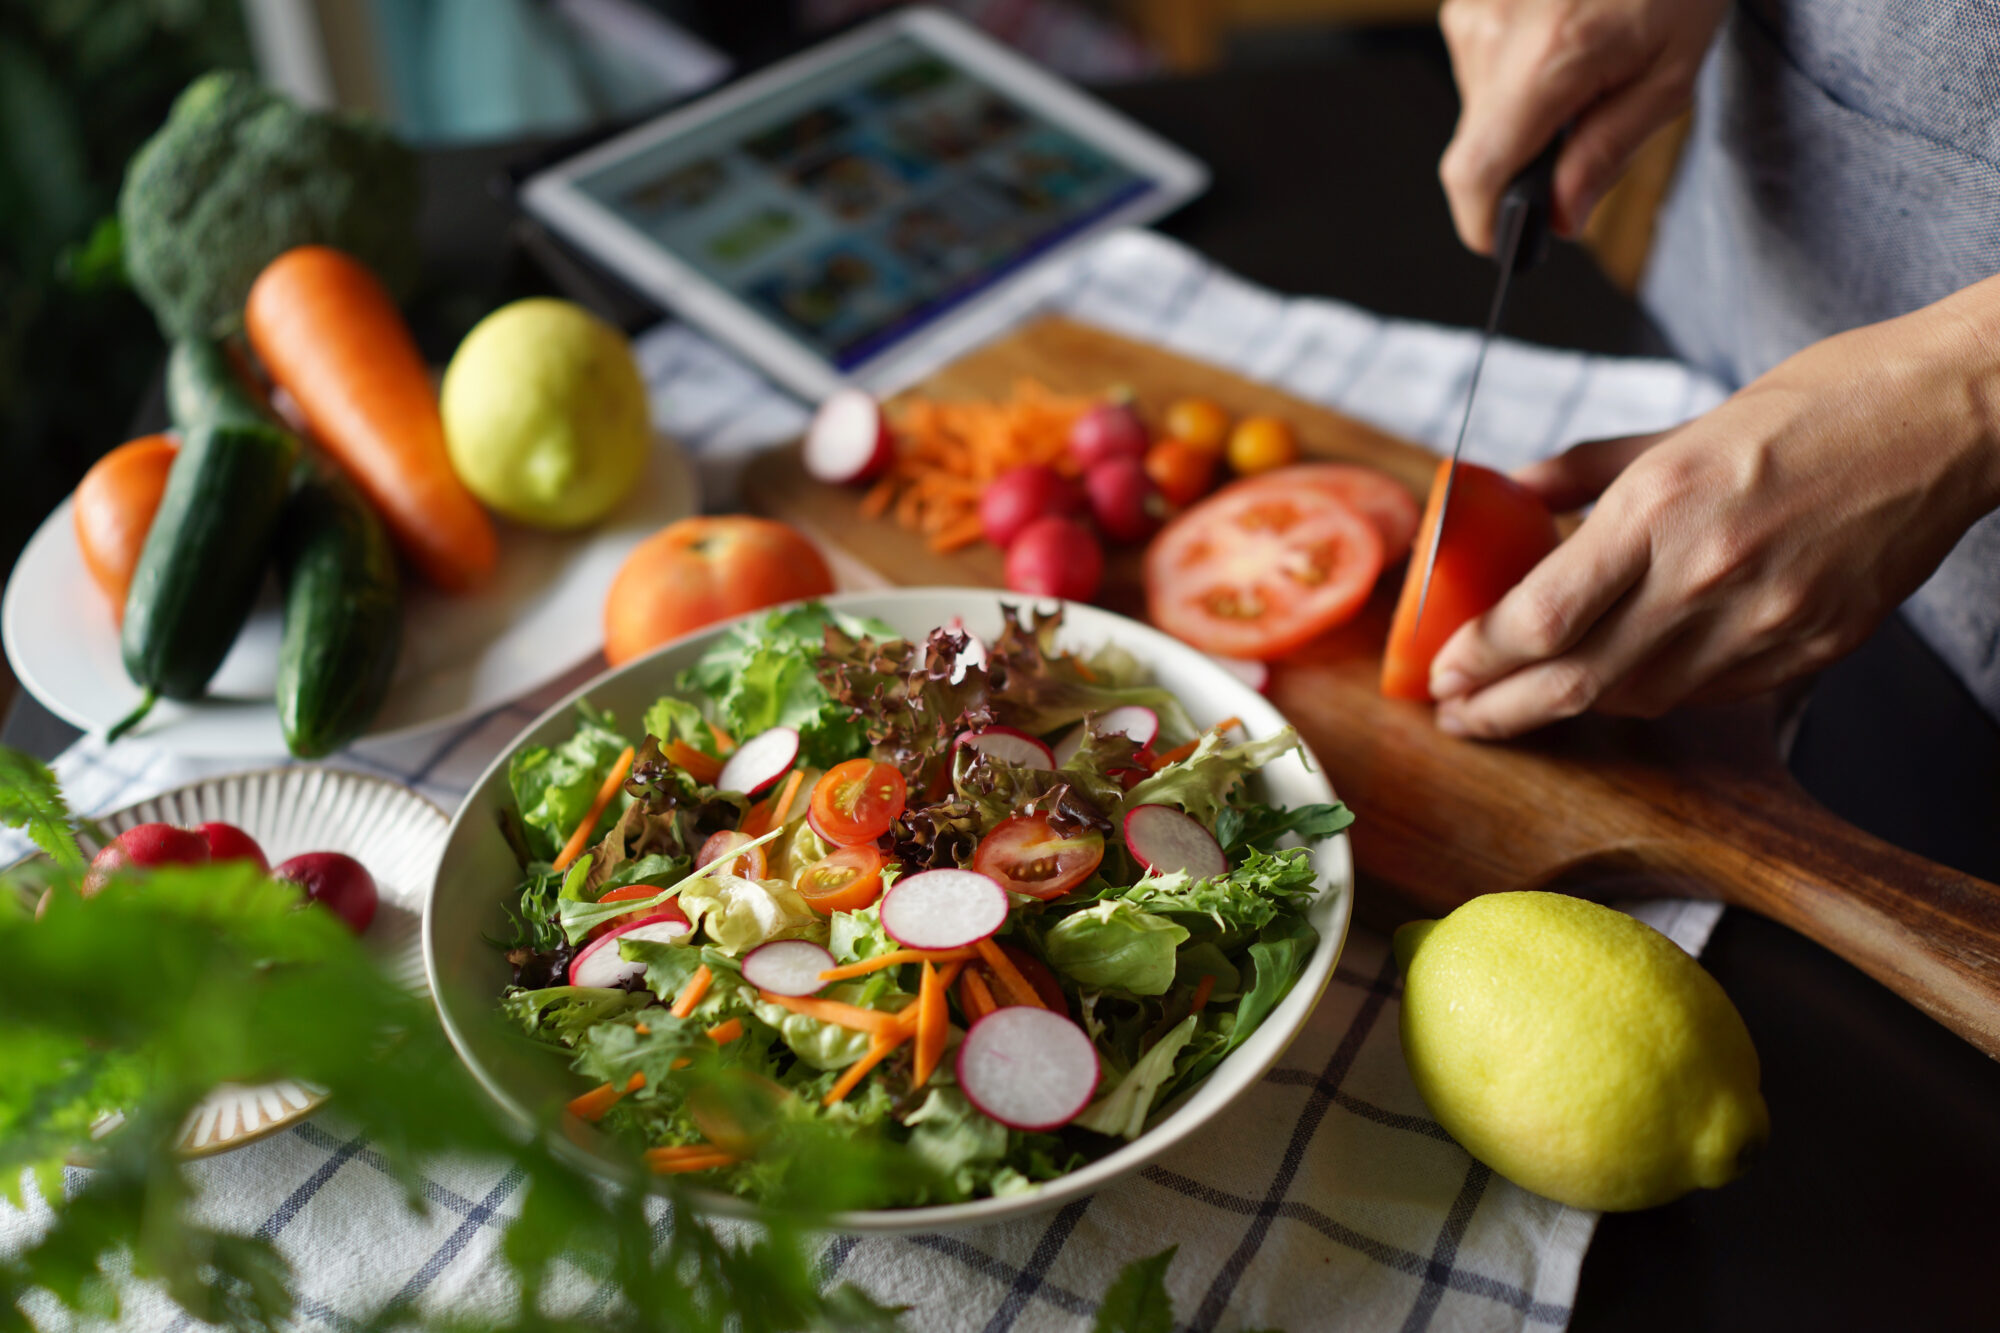 A close up image of a salad bowl with mixed greens, shredded carrot, radishes, and cherry tomatoes. In the background of the photo, someone is slicing a tomato while reading a recipe on a propped-up digital tablet.